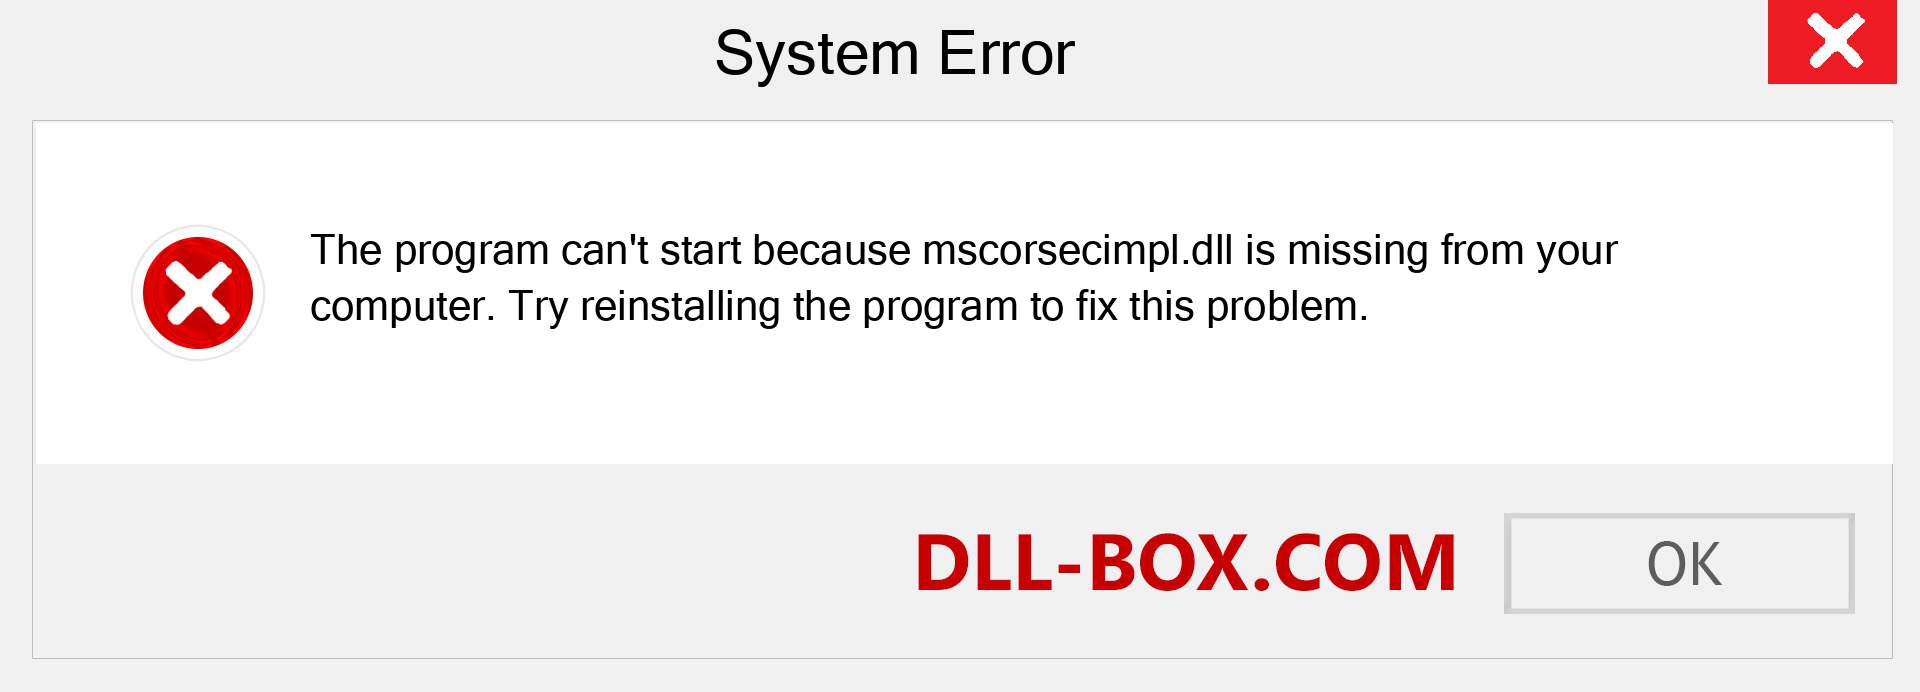  mscorsecimpl.dll file is missing?. Download for Windows 7, 8, 10 - Fix  mscorsecimpl dll Missing Error on Windows, photos, images